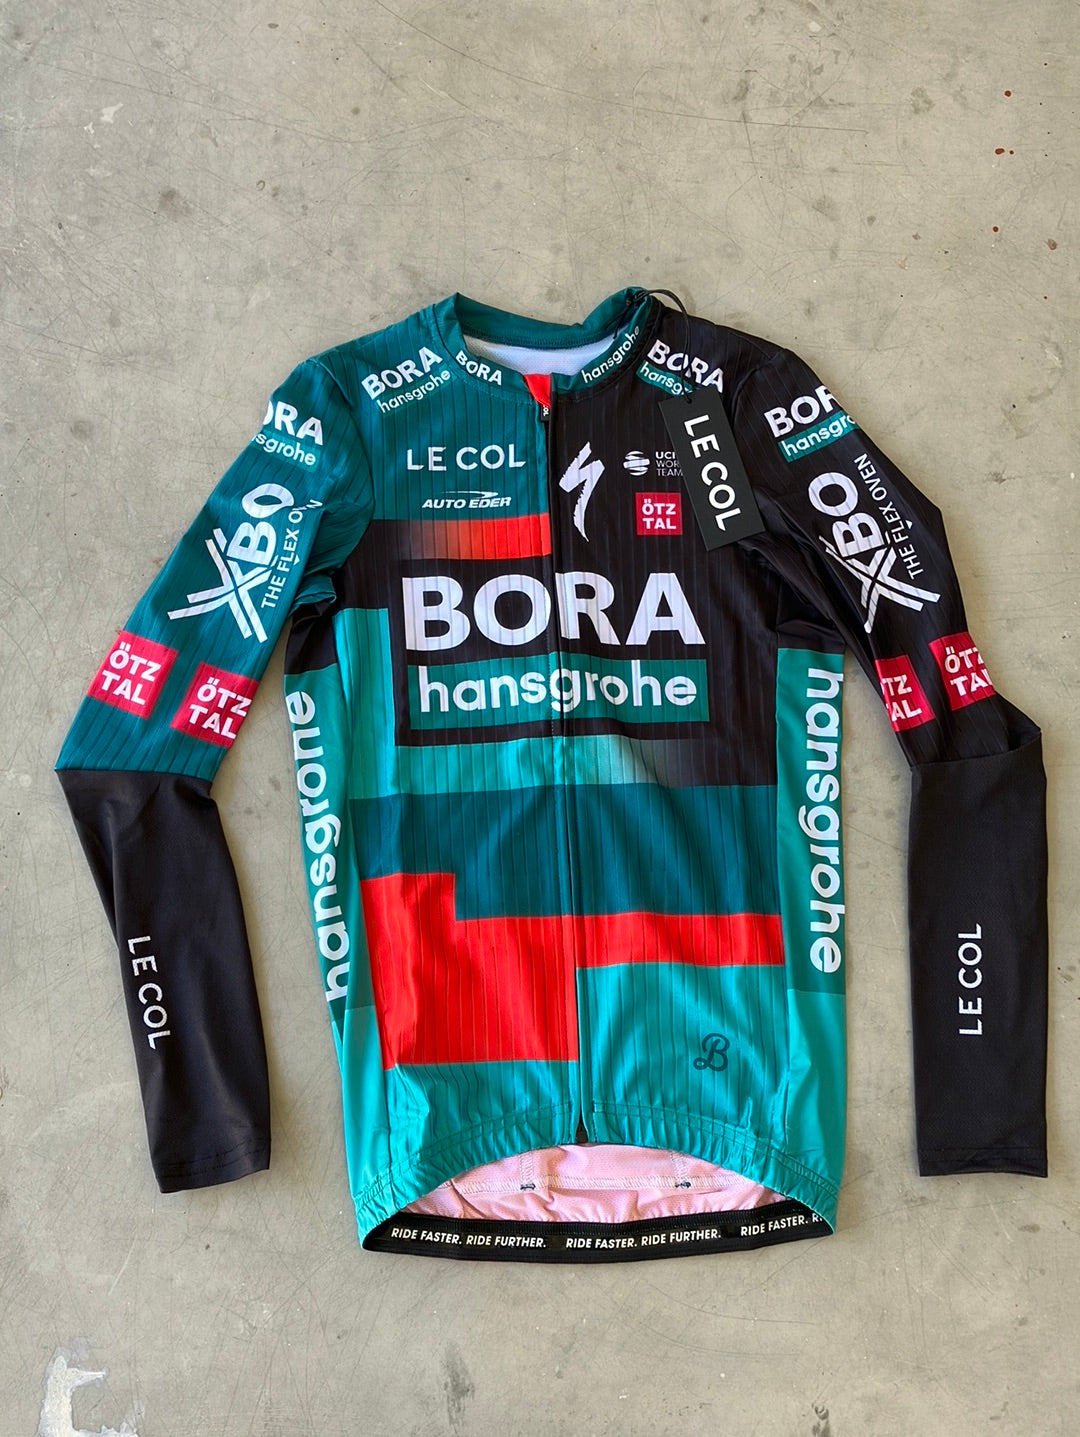 Aero Jersey Long Sleeve | Le Col | Bora Hansgrohe | Pro-Issued Cycling Kit